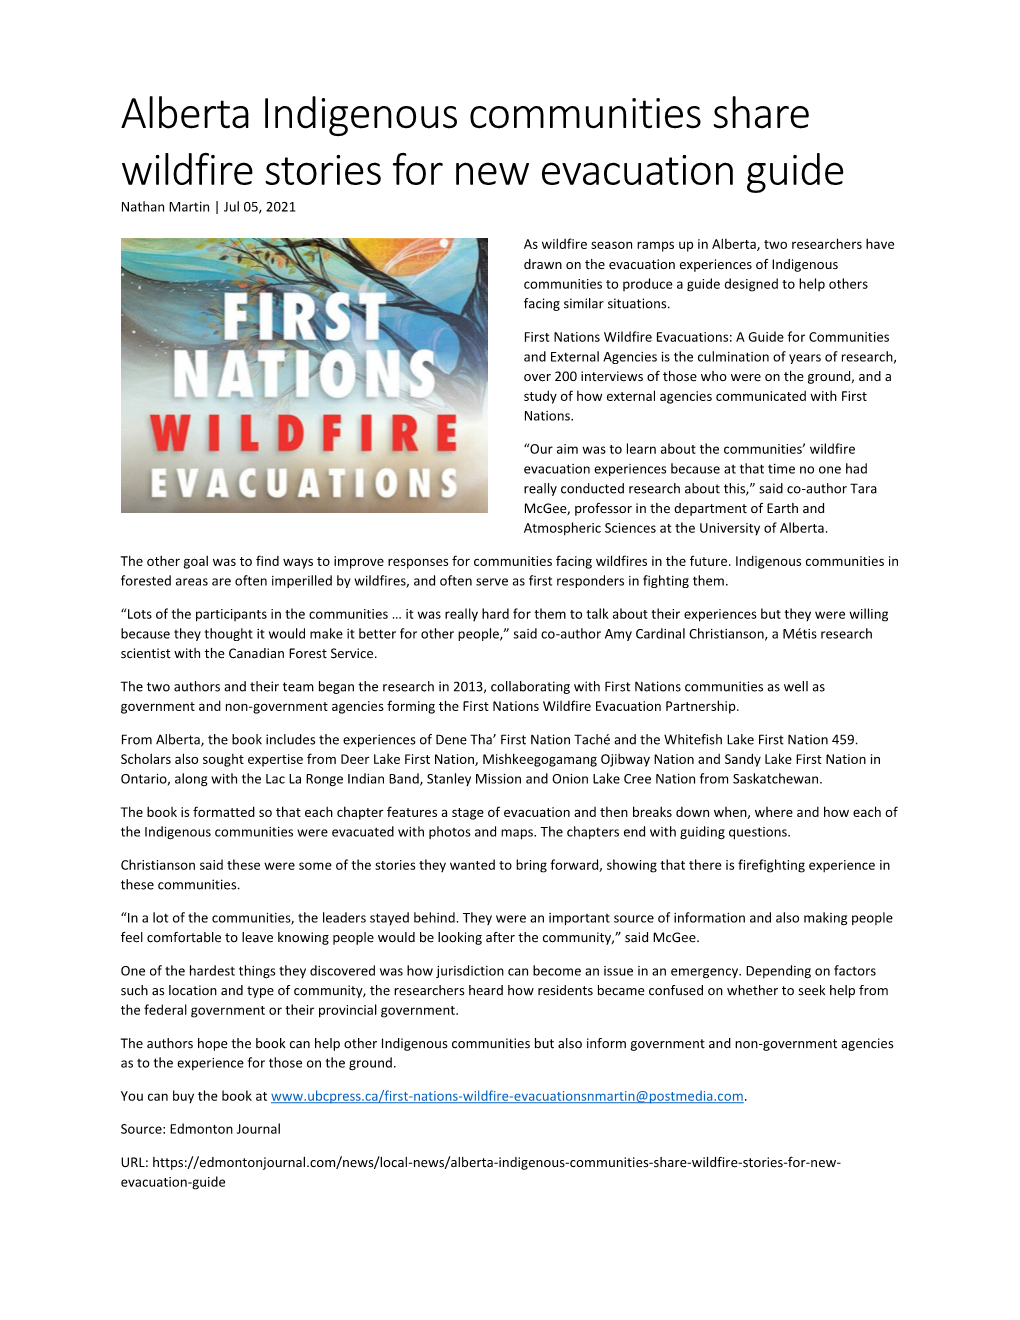 Alberta Indigenous Communities Share Wildfire Stories for New Evacuation Guide Nathan Martin | Jul 05, 2021